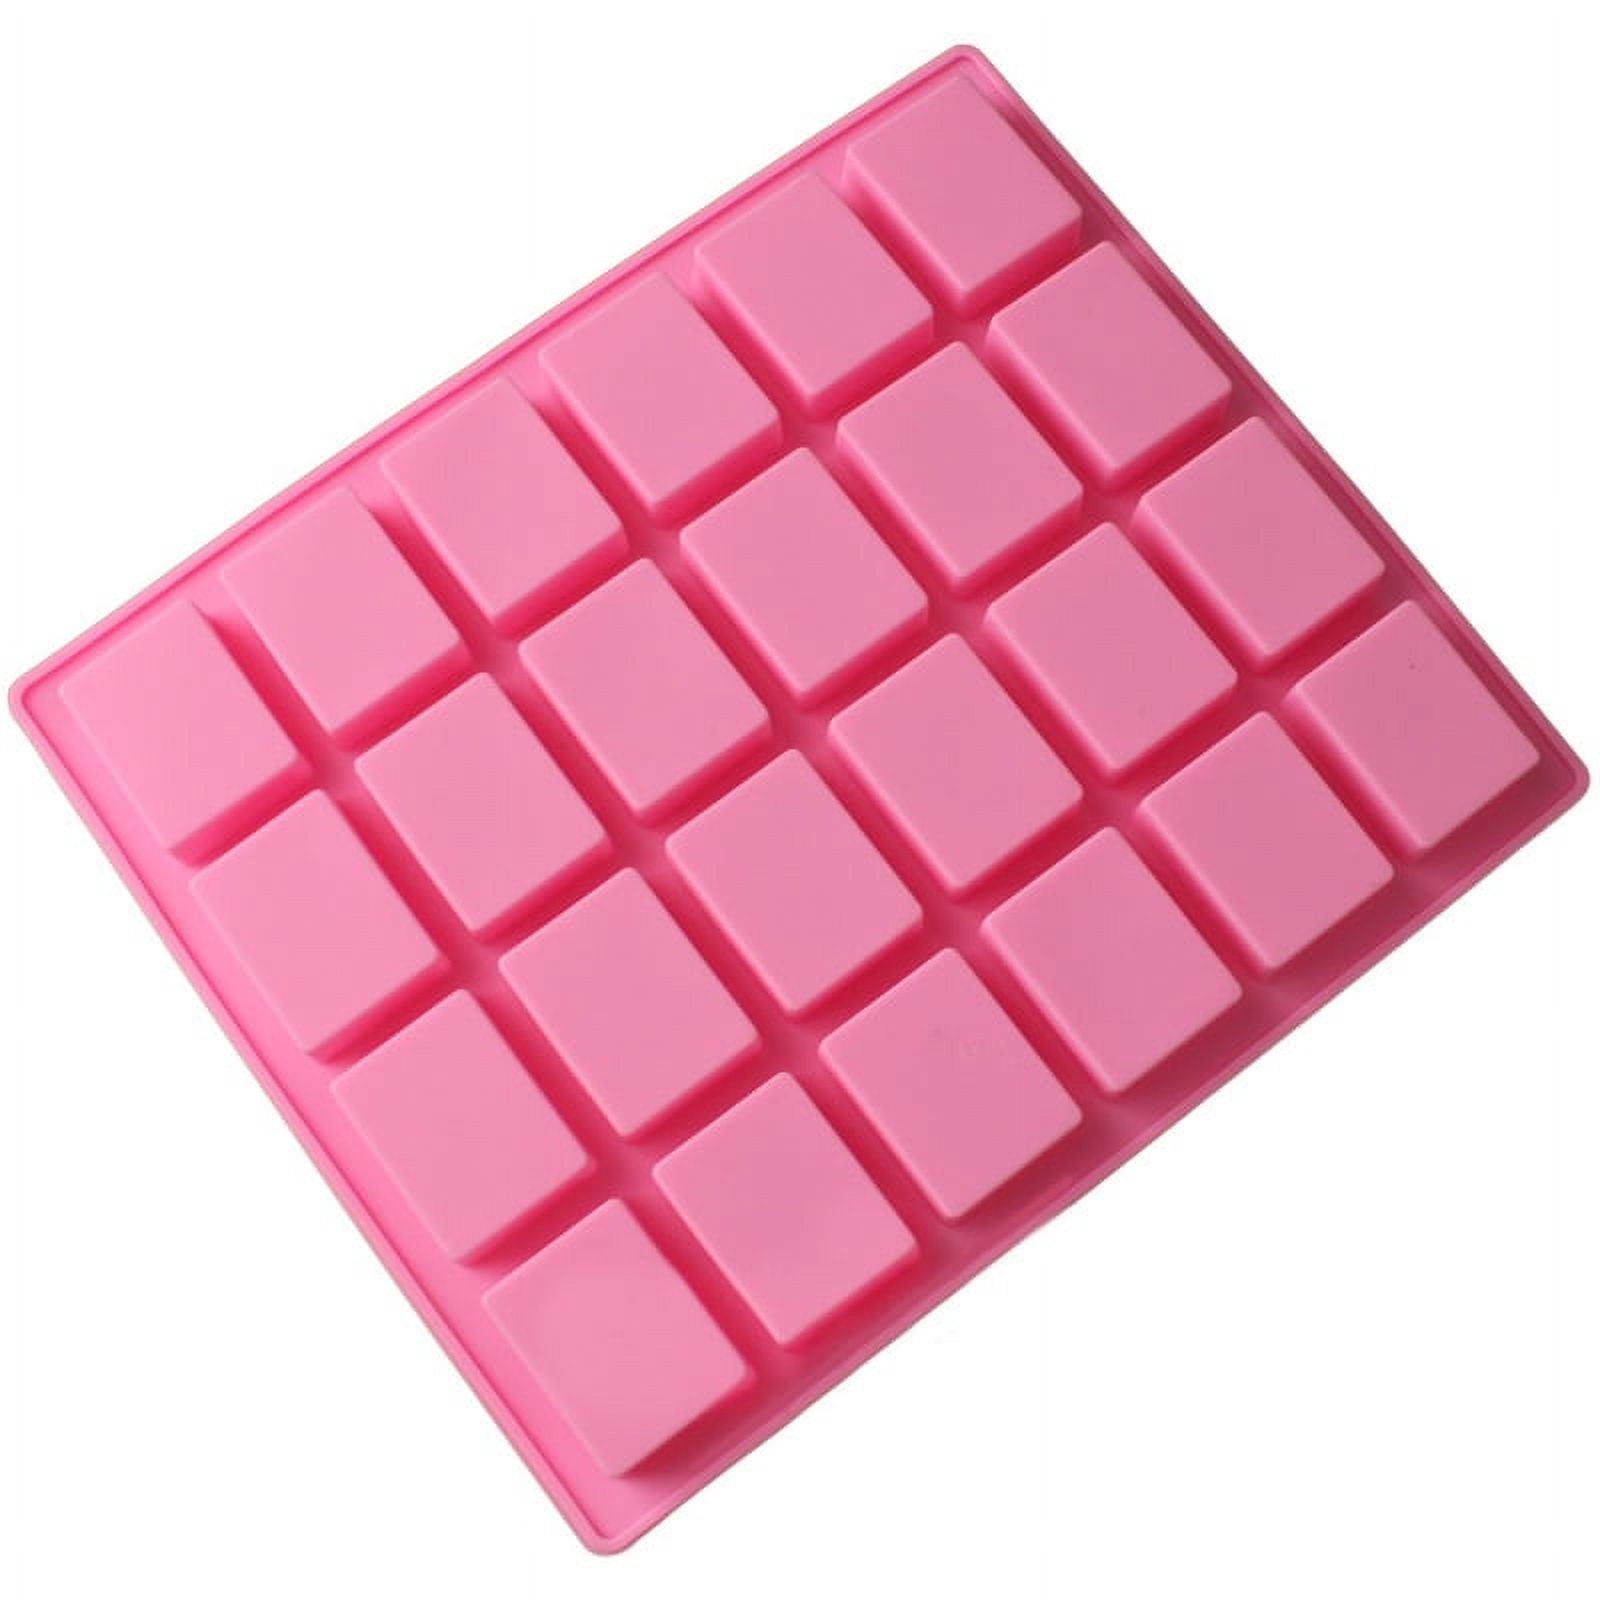 Silicone Soap Mold, 1 pcs 24-Cavity Square Baking Molds for Making Soaps,  Ice Cubes, Jelly 